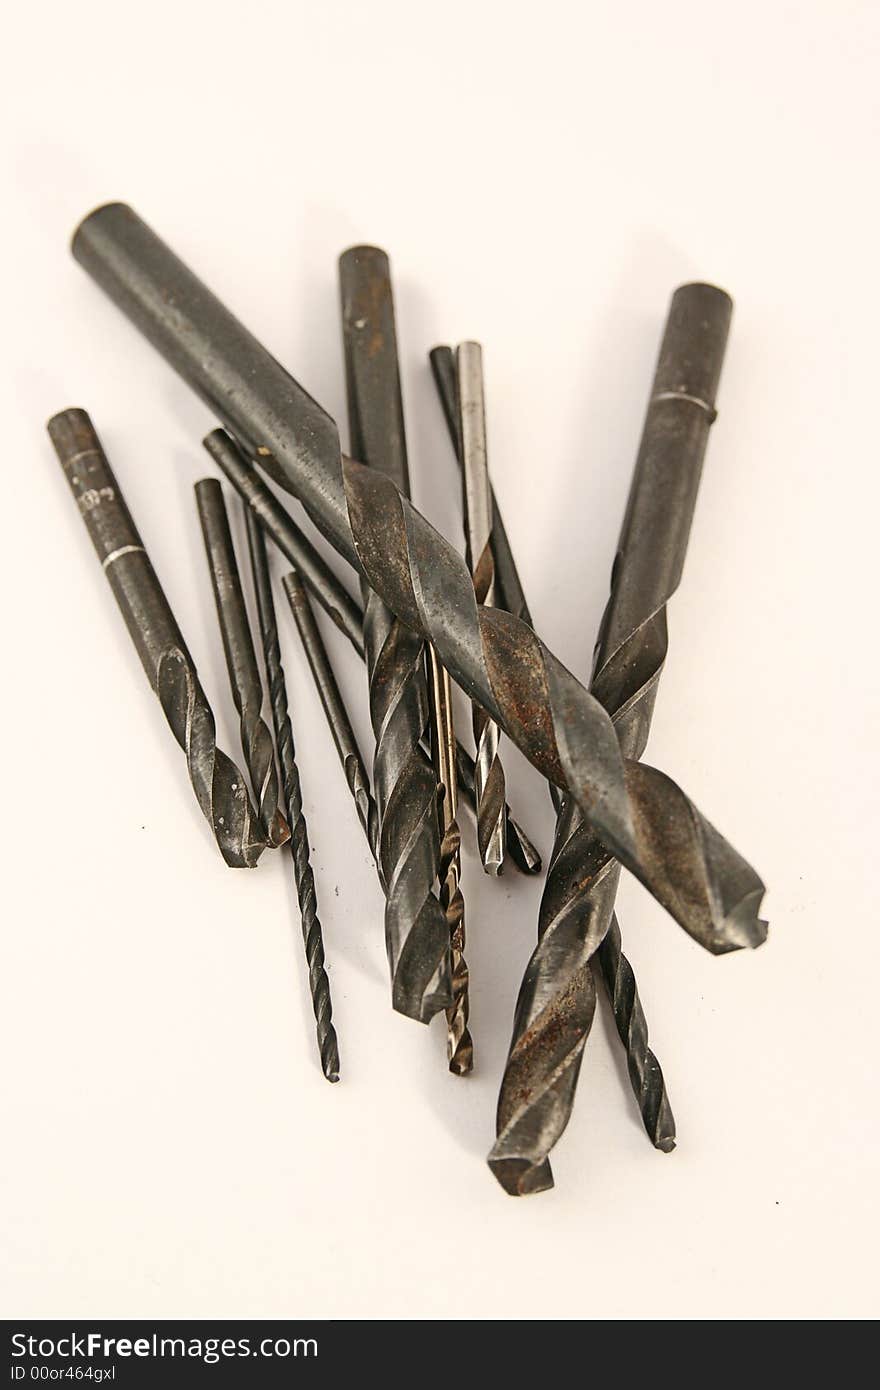 Many drill bits of different sizes on white background